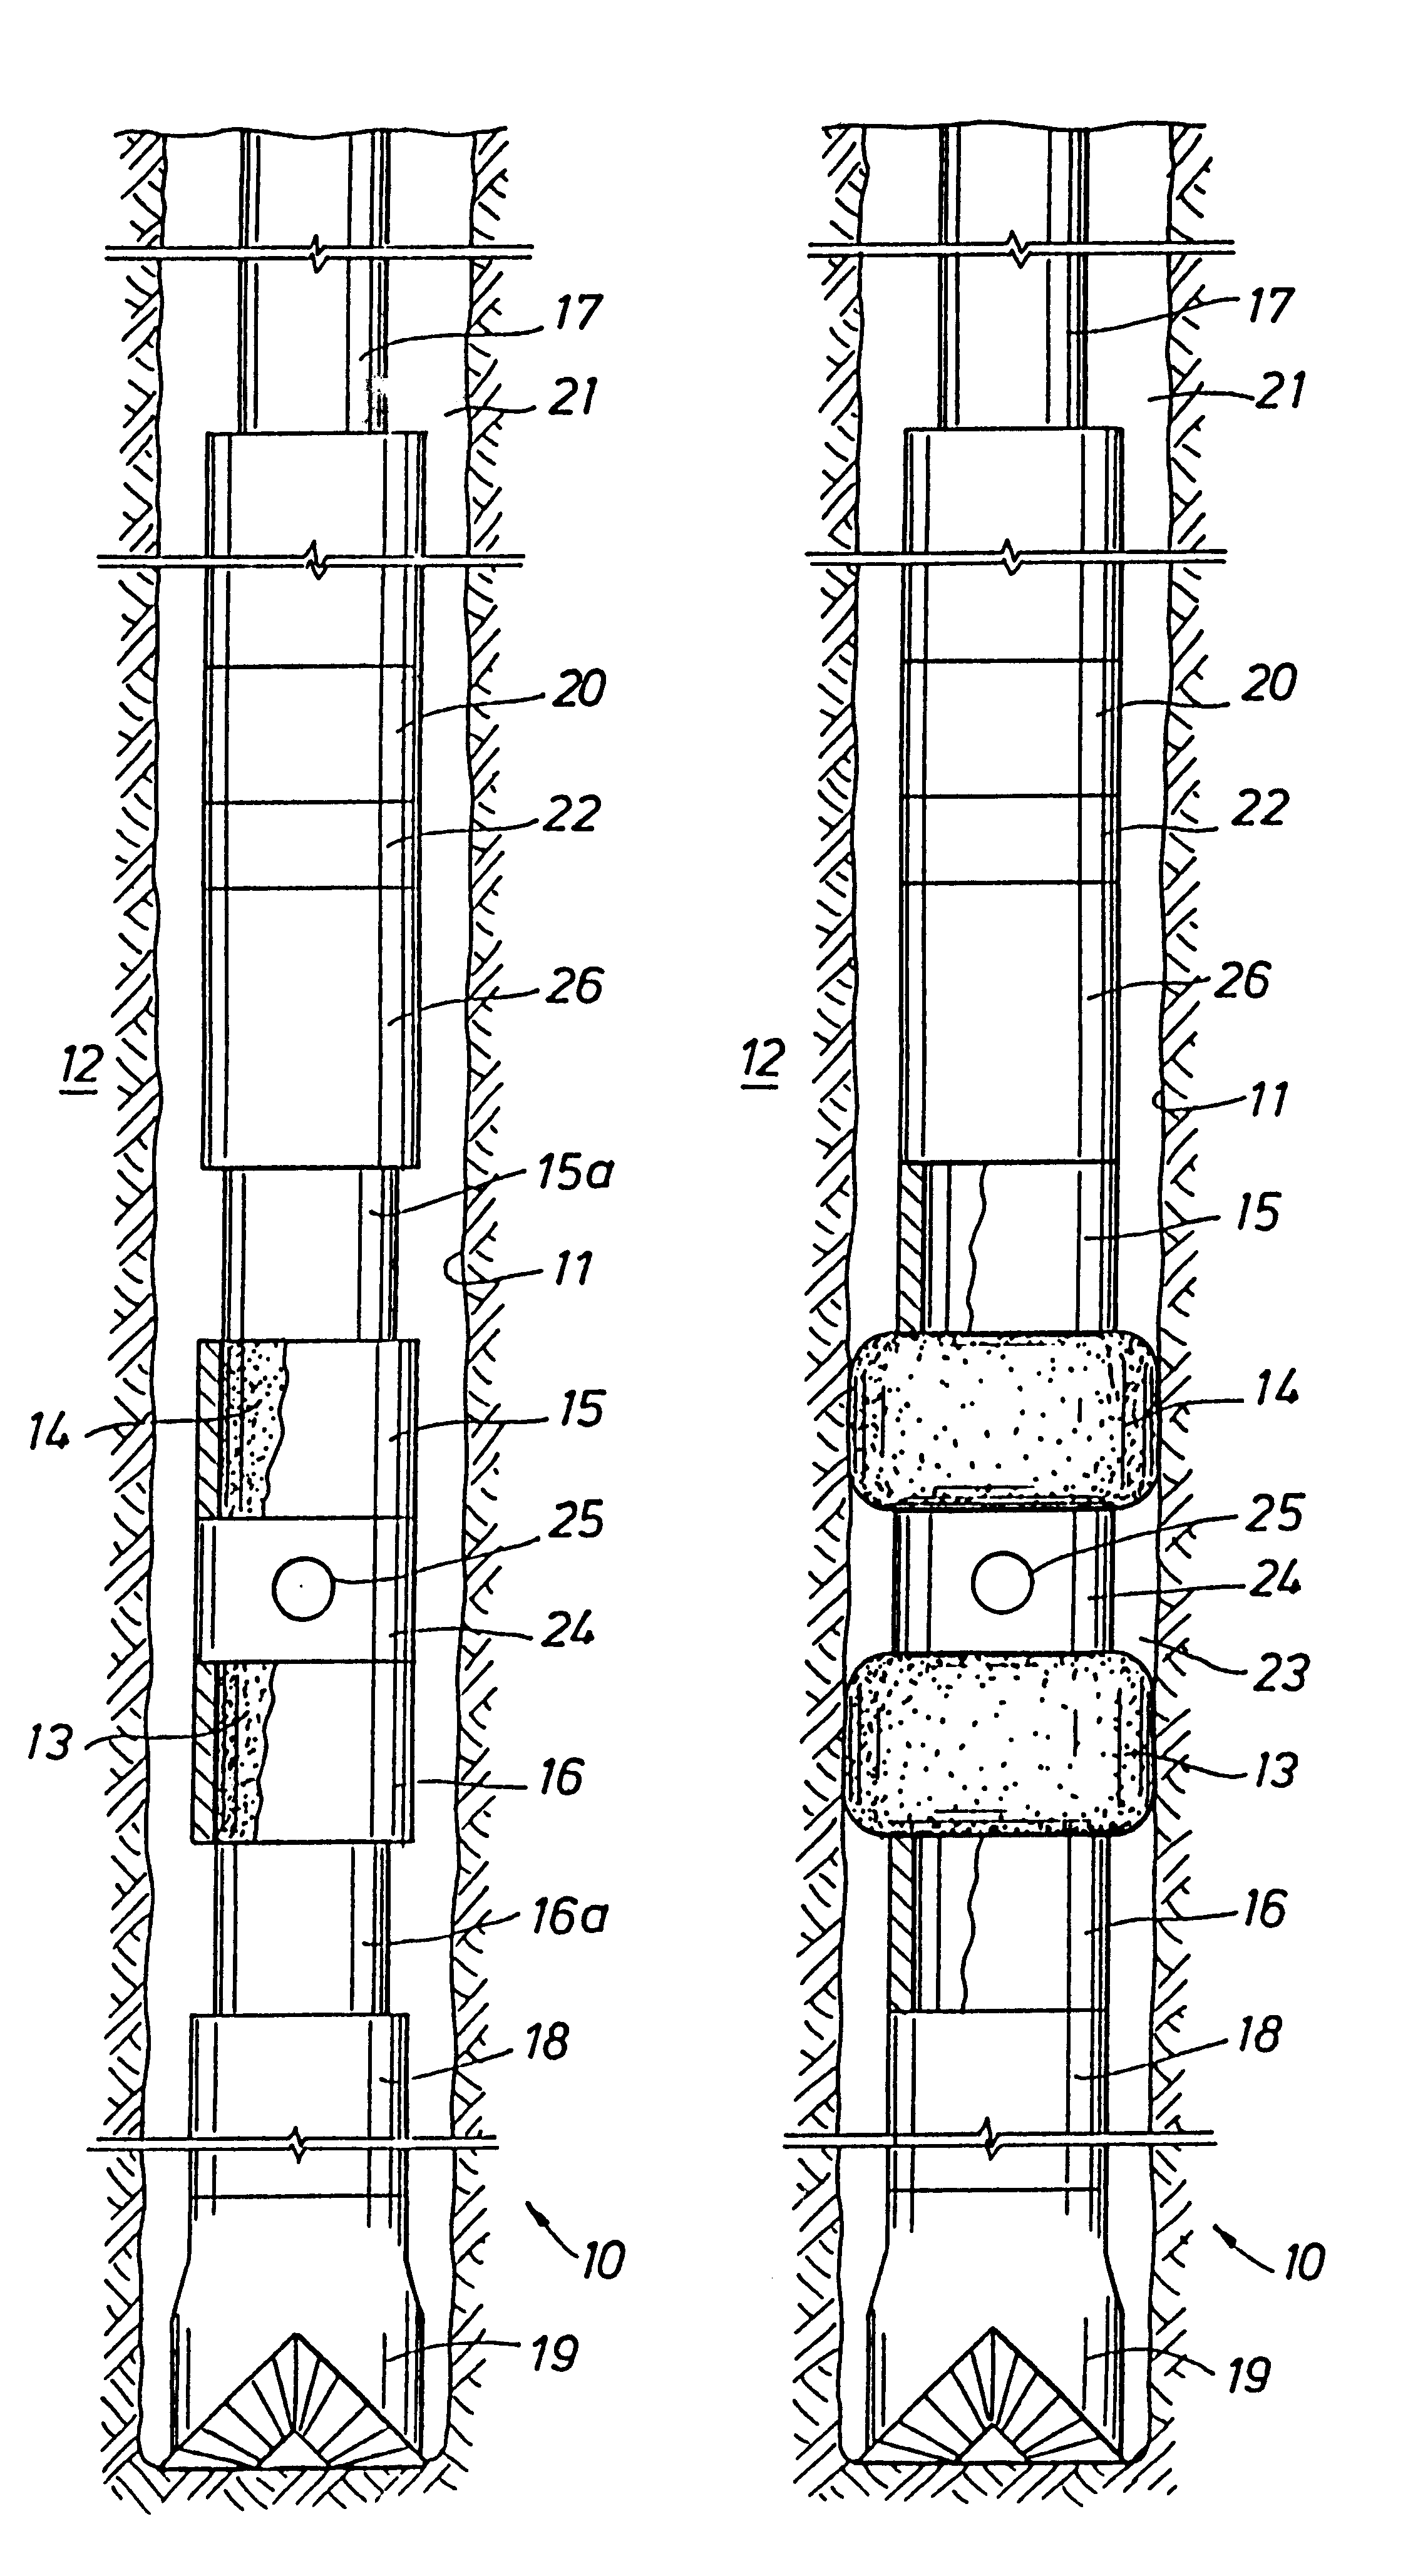 Subsurface measurement apparatus, system, and process for improved well drilling, control, and production